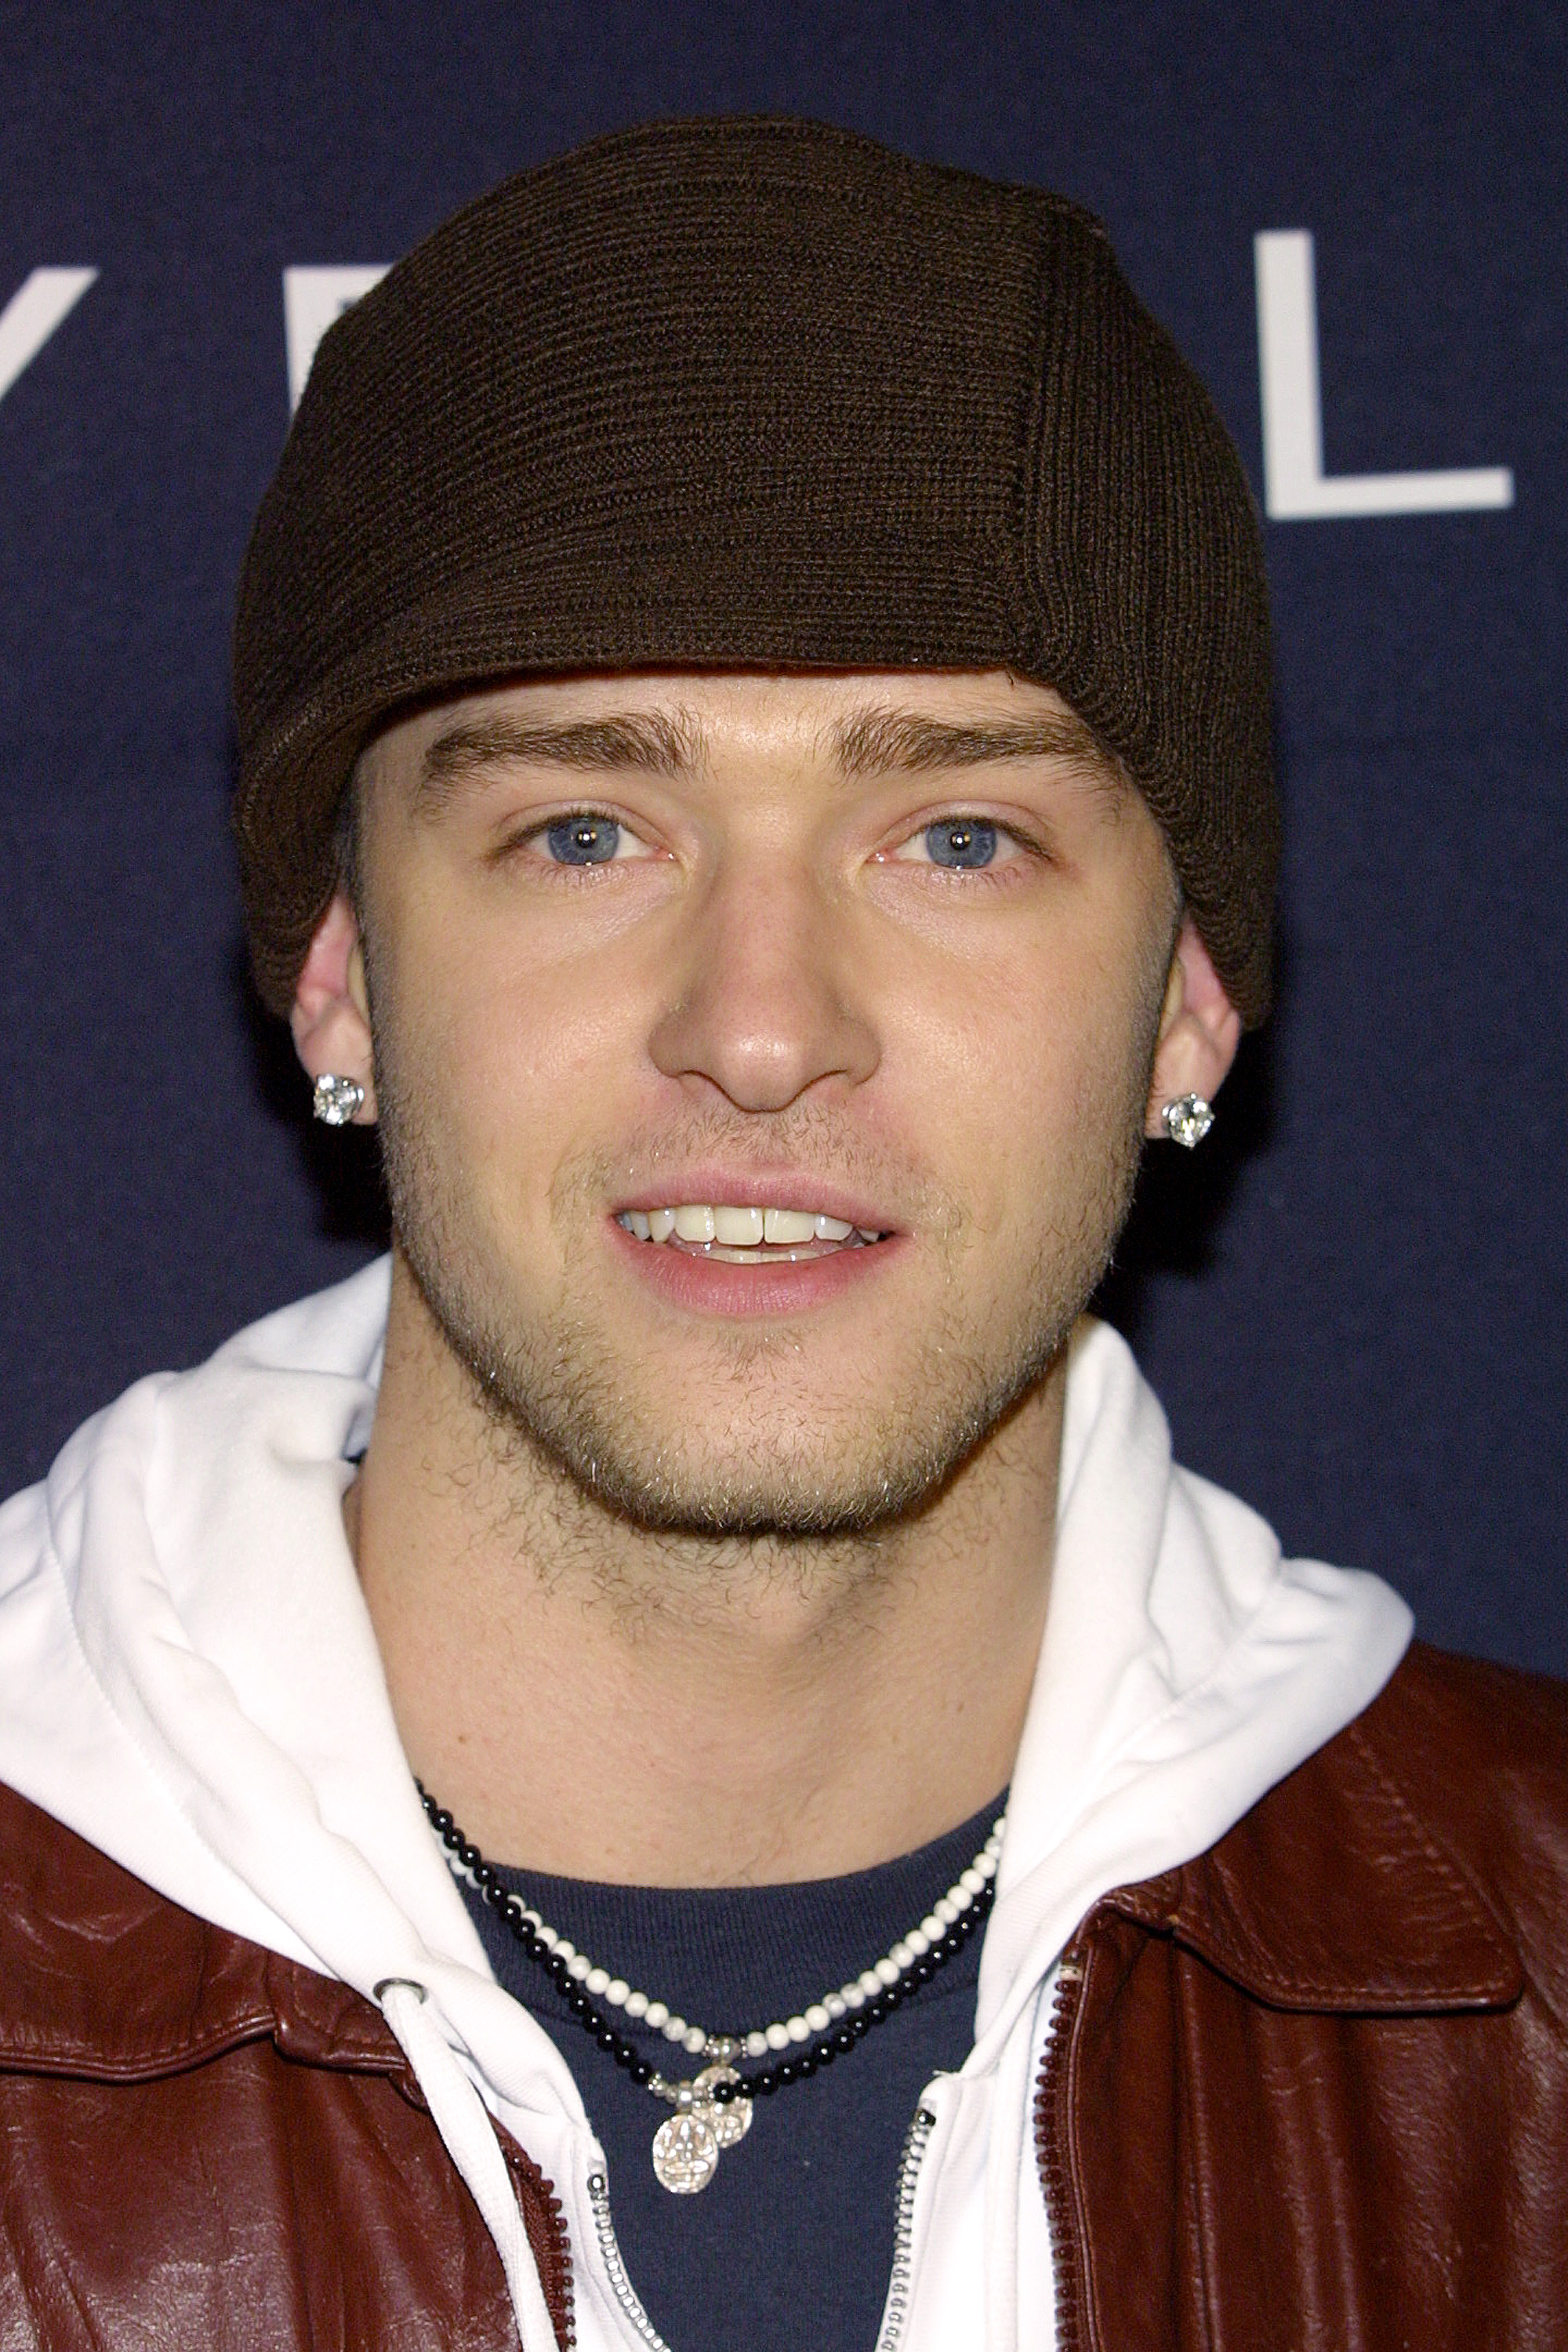 Justin Timberlake auf der Teen People and Universal Records Party in Hollywood, Kalifornien am 13. Januar 2003 | Quelle: Getty Images